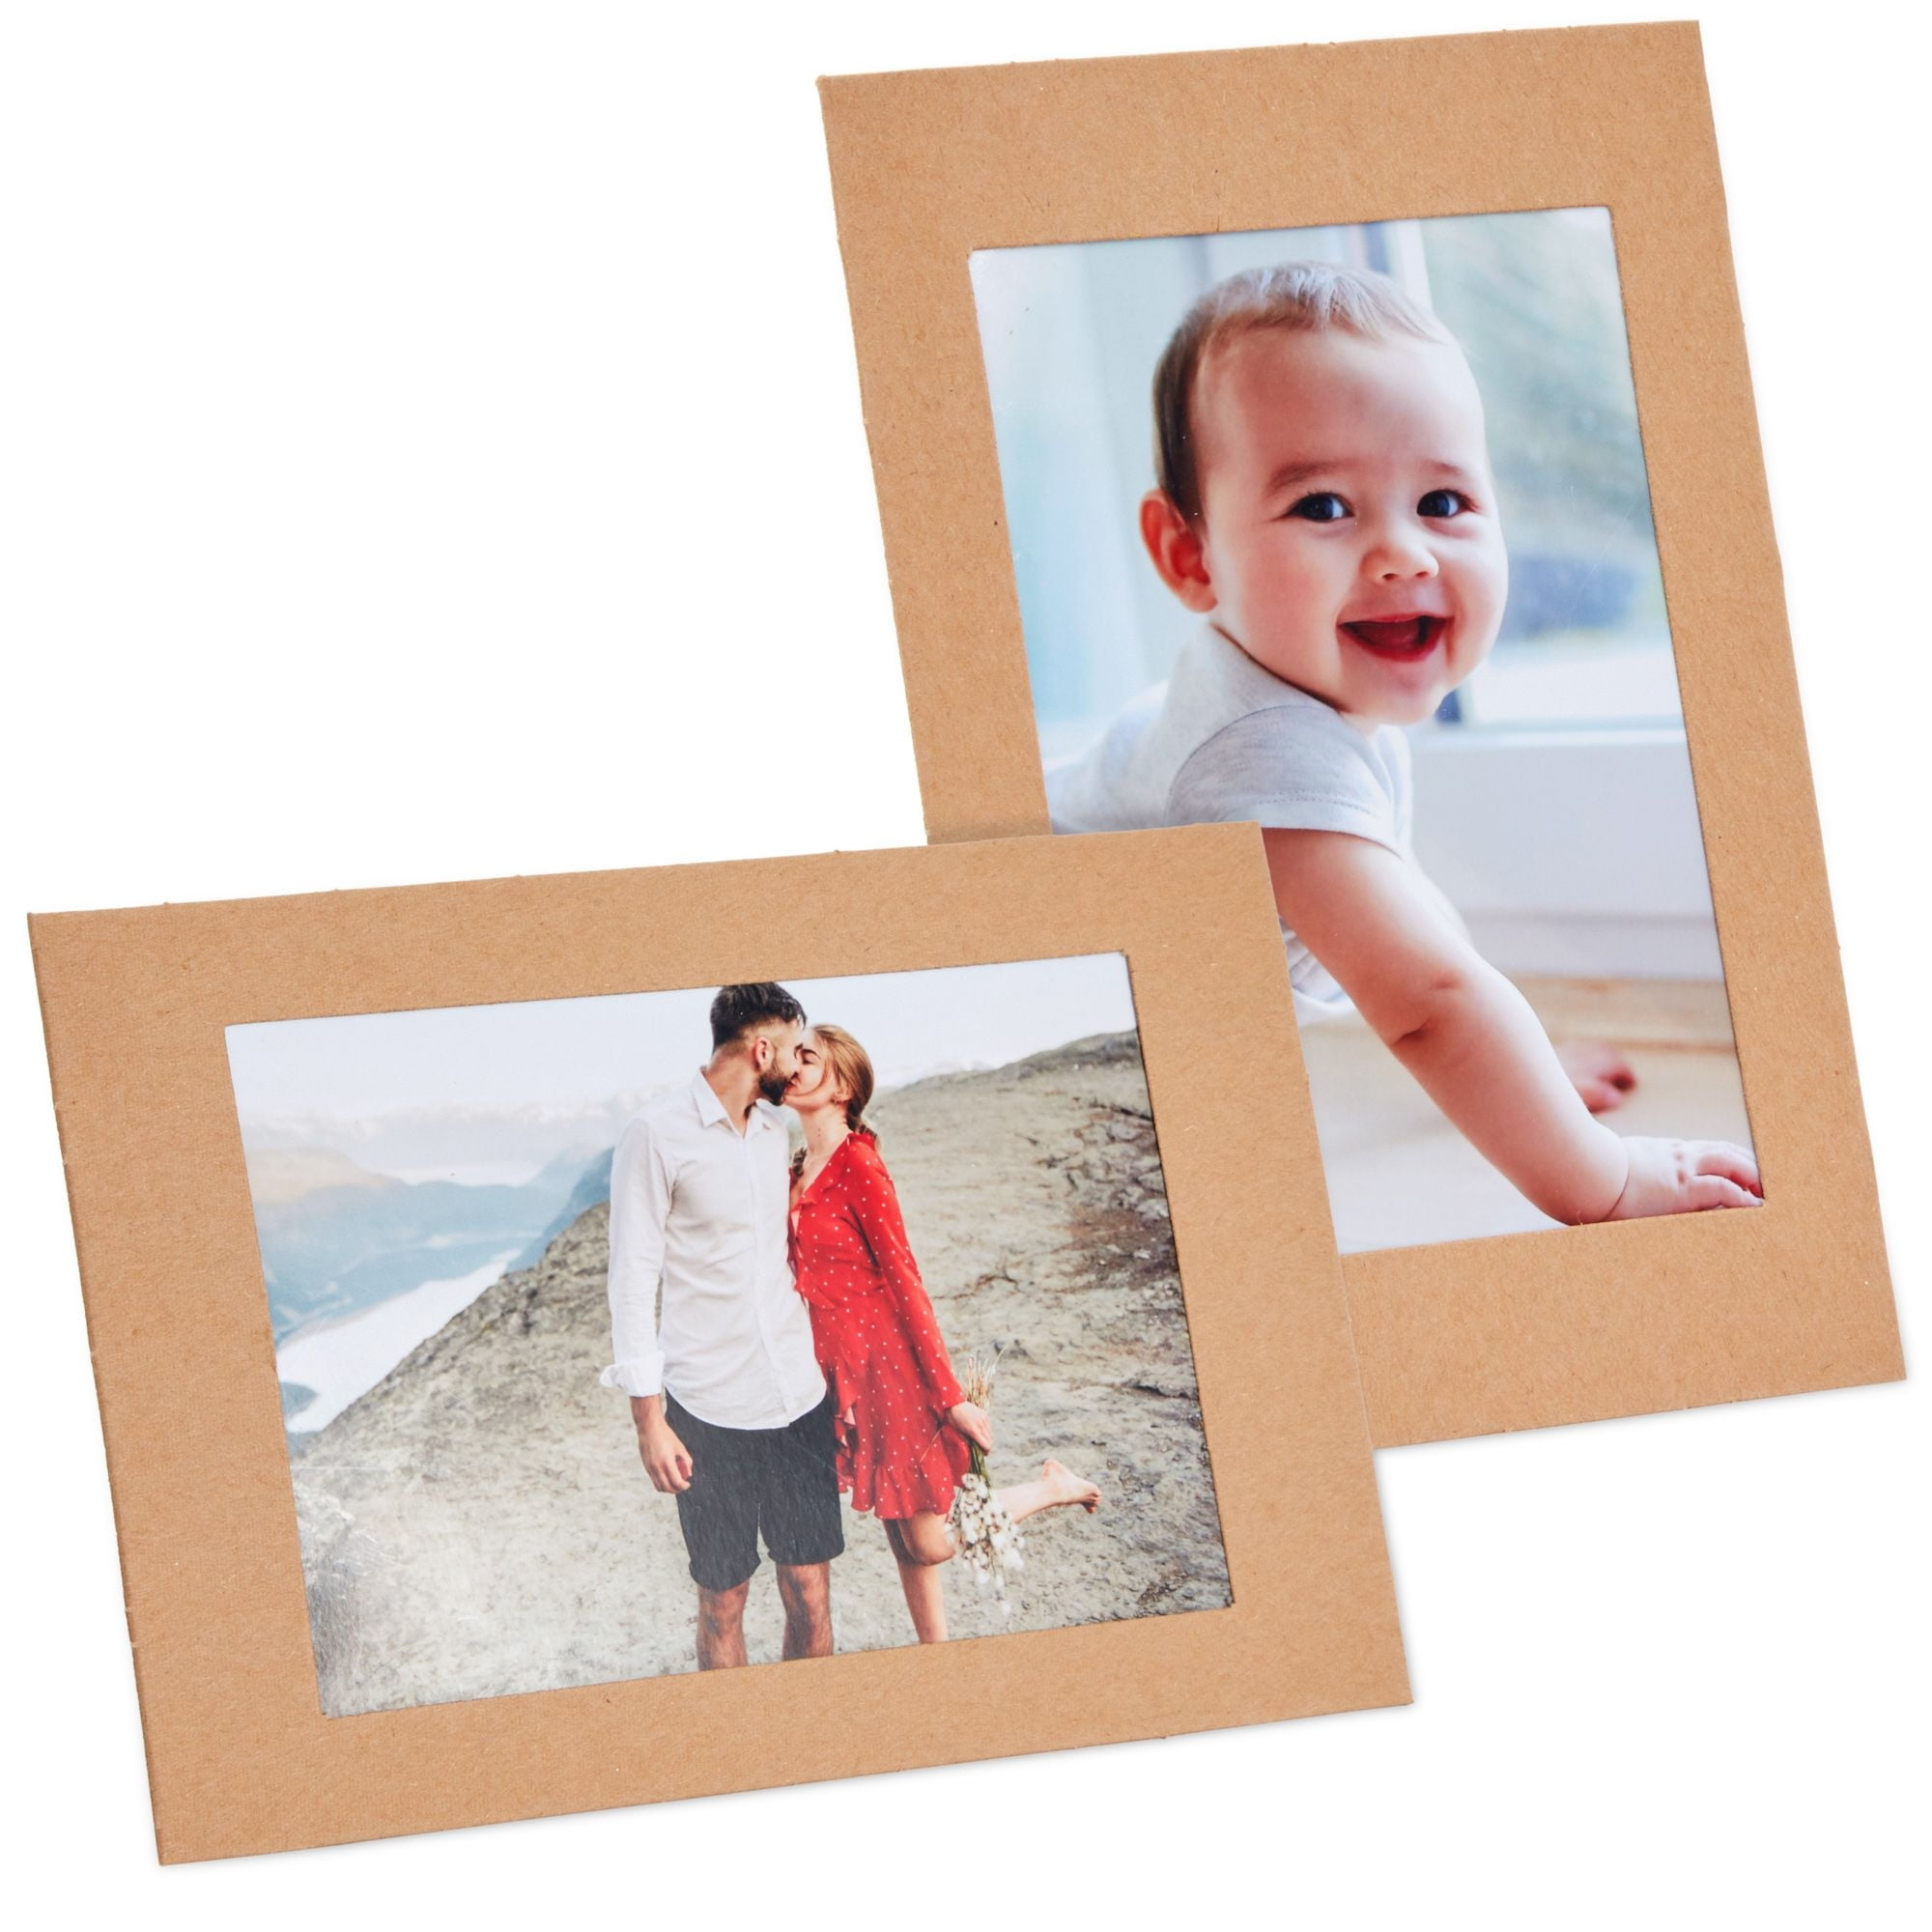 50 Pcs 4 x 6 in Colorful Paper Picture Frames Cardboard Photo Easels DIY  Paper Photo Frame with 200 Pcs Colorful Glitter Foam Stickers Self Adhesive